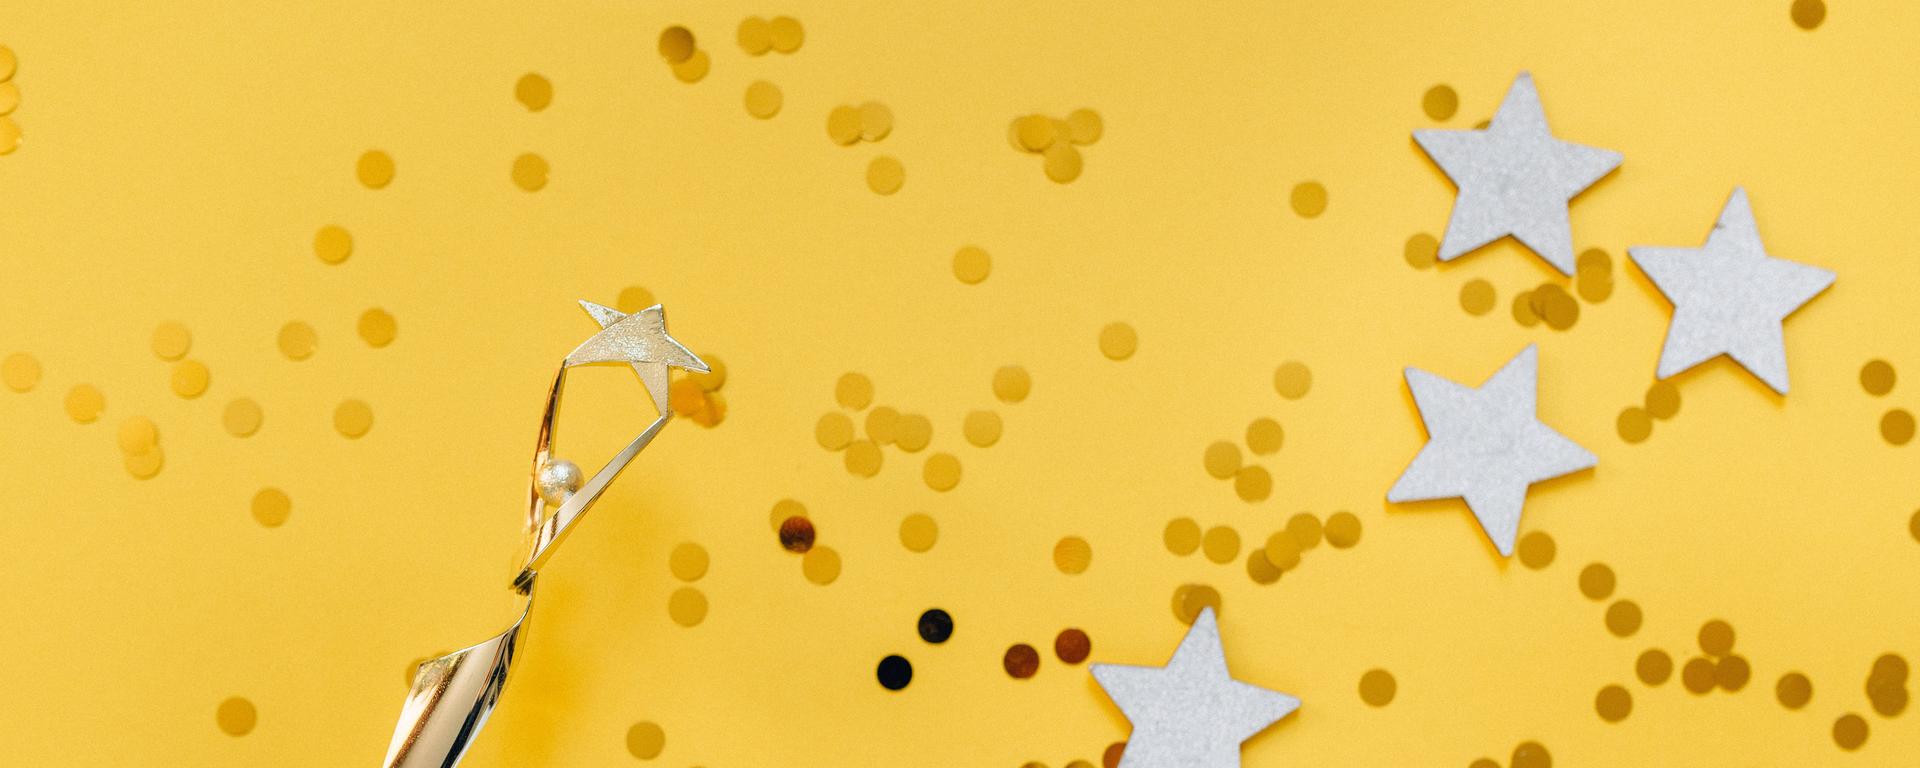 Glitter and stars with trophy on yellow background